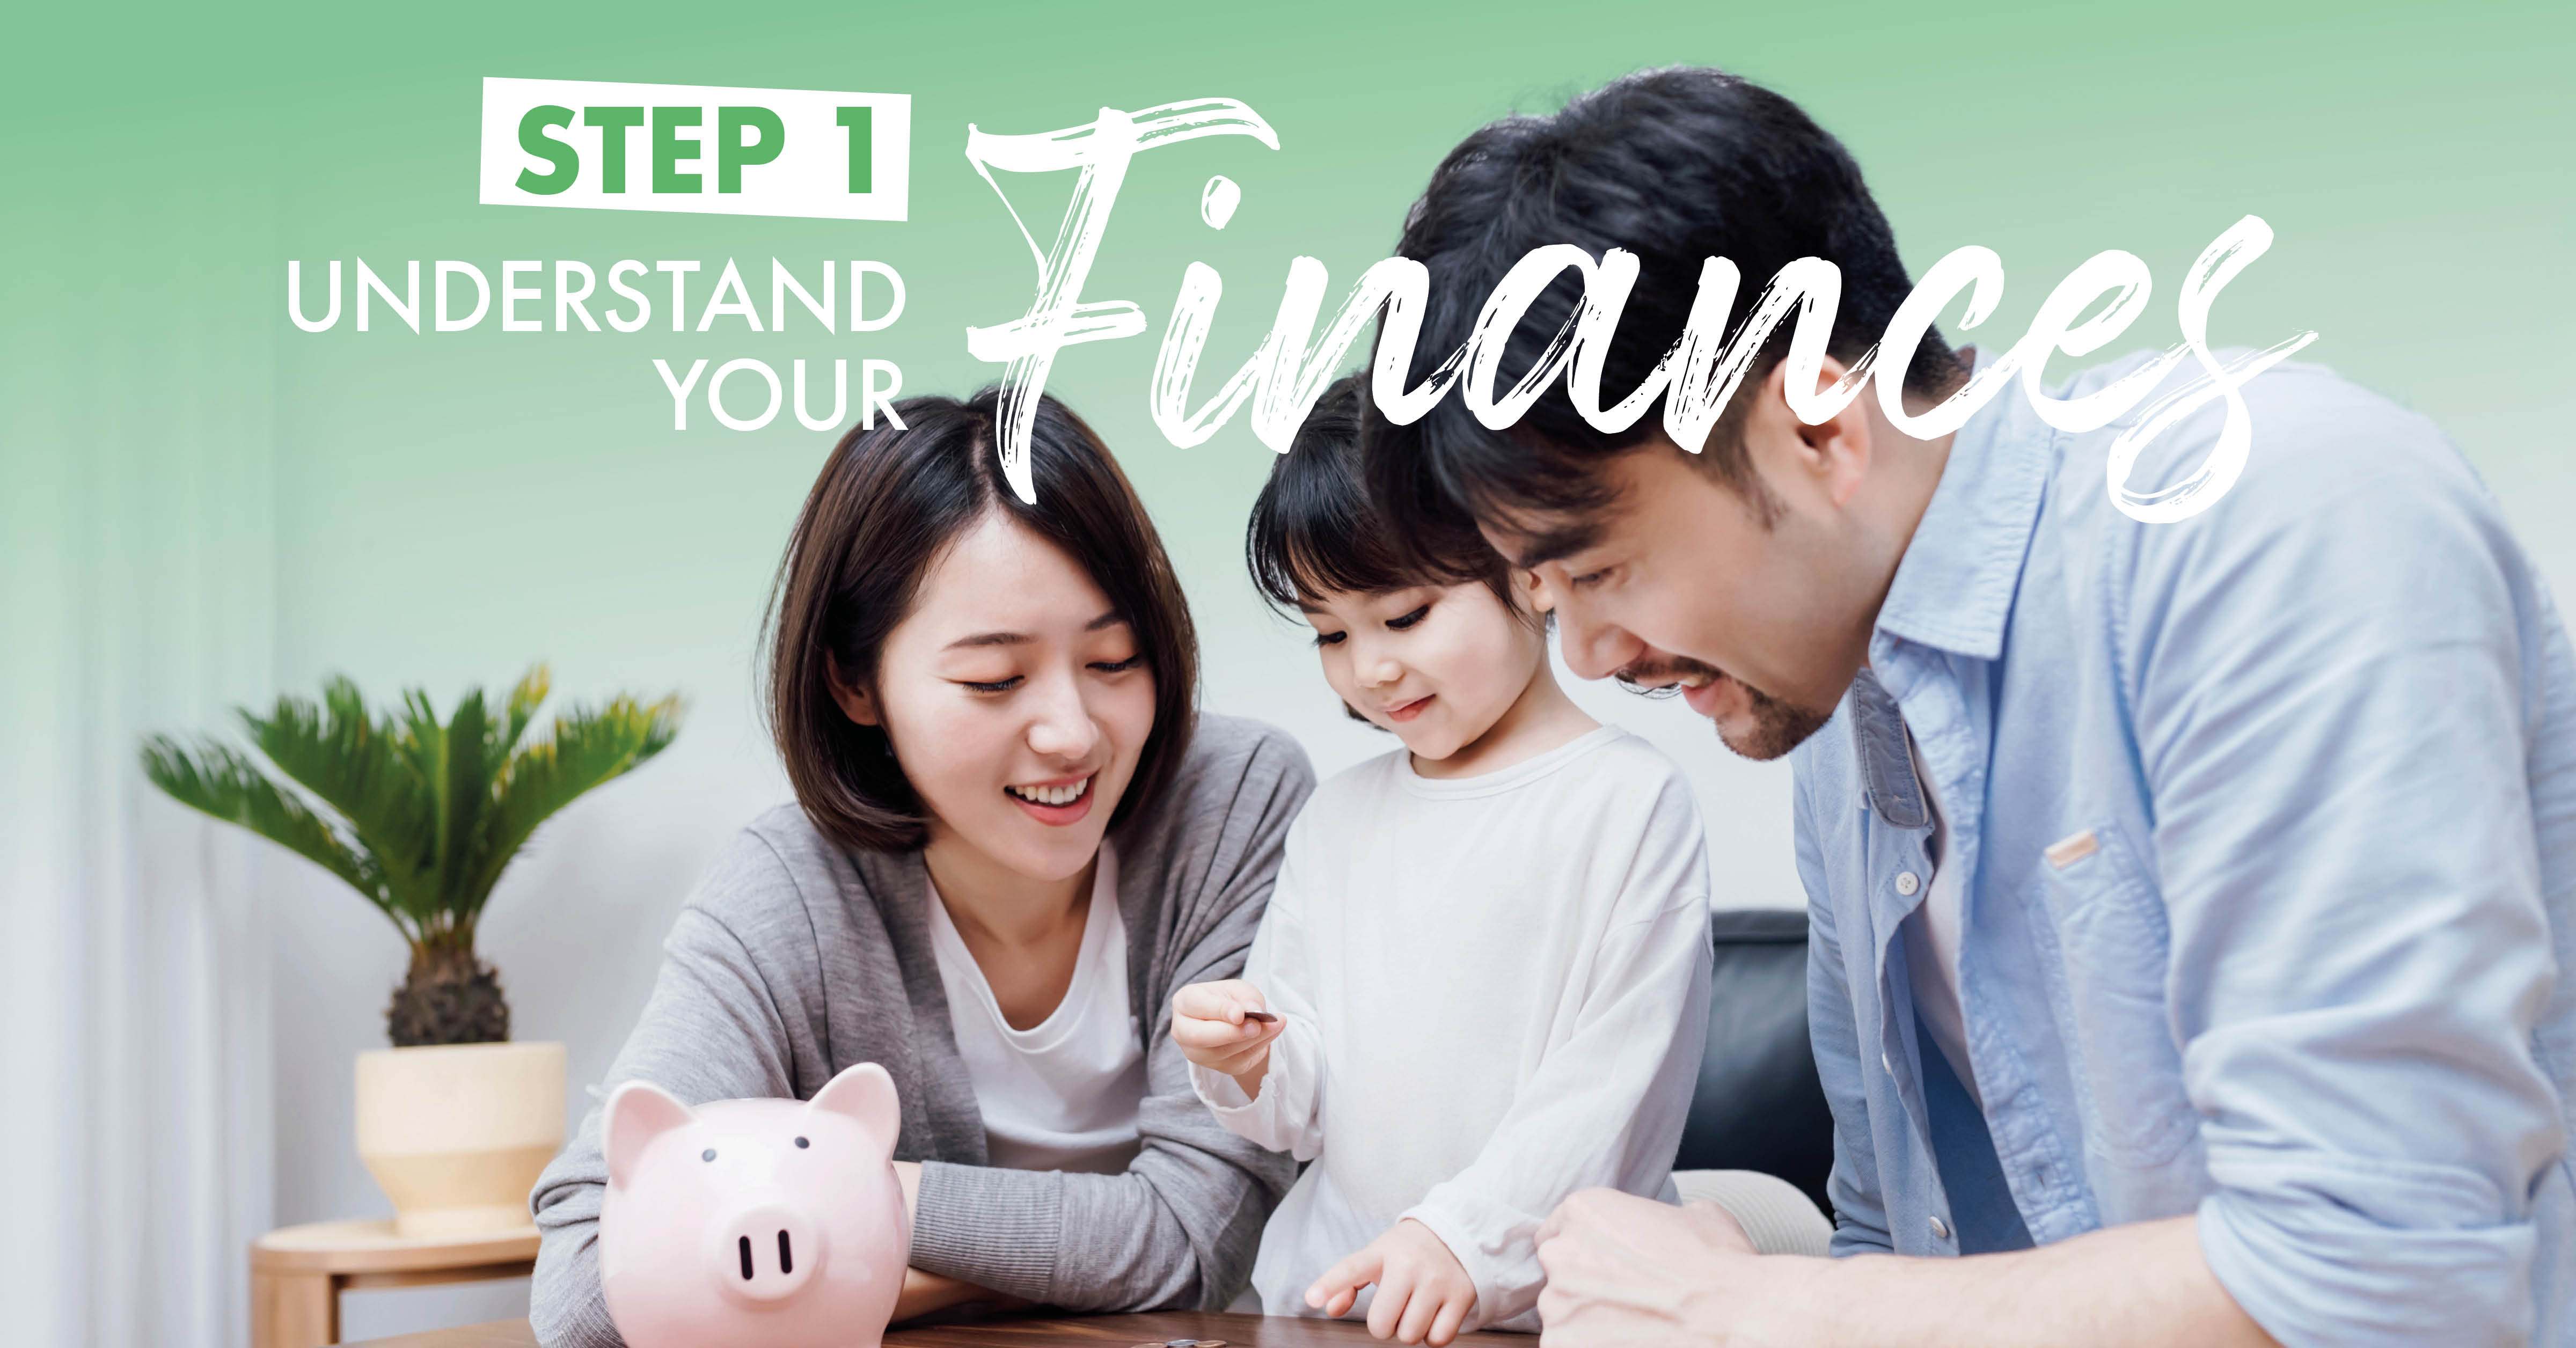 Home Planning Guide Step 1: Understand Your Finances